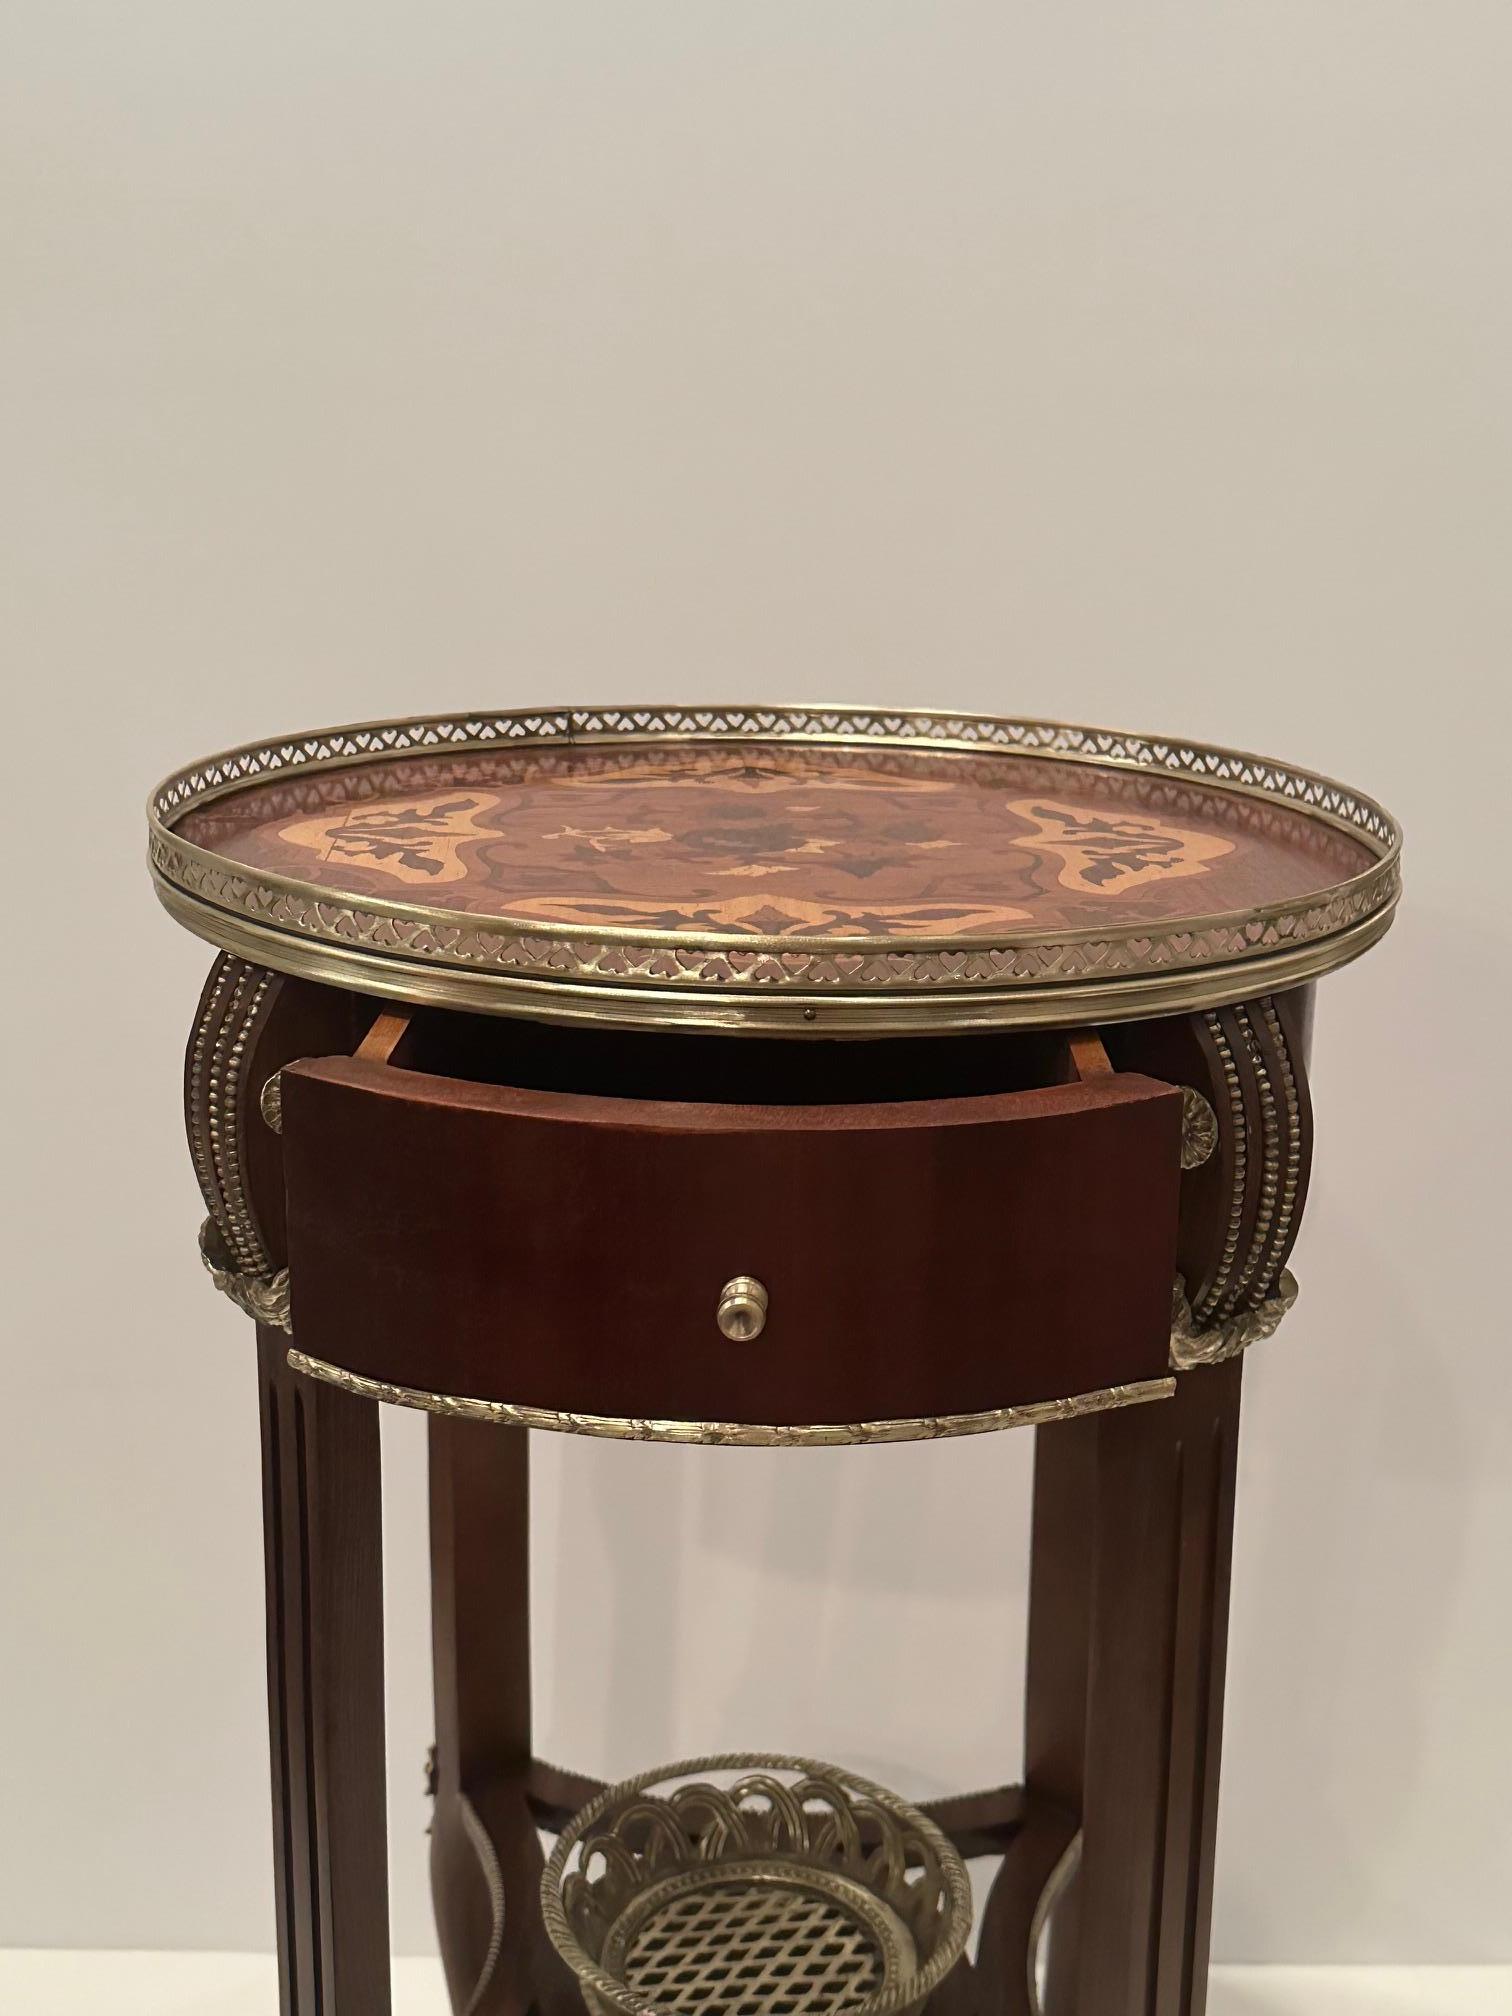 Sumptuous Round Mahogany Inlaid Side Table with Bronze Mounts 6